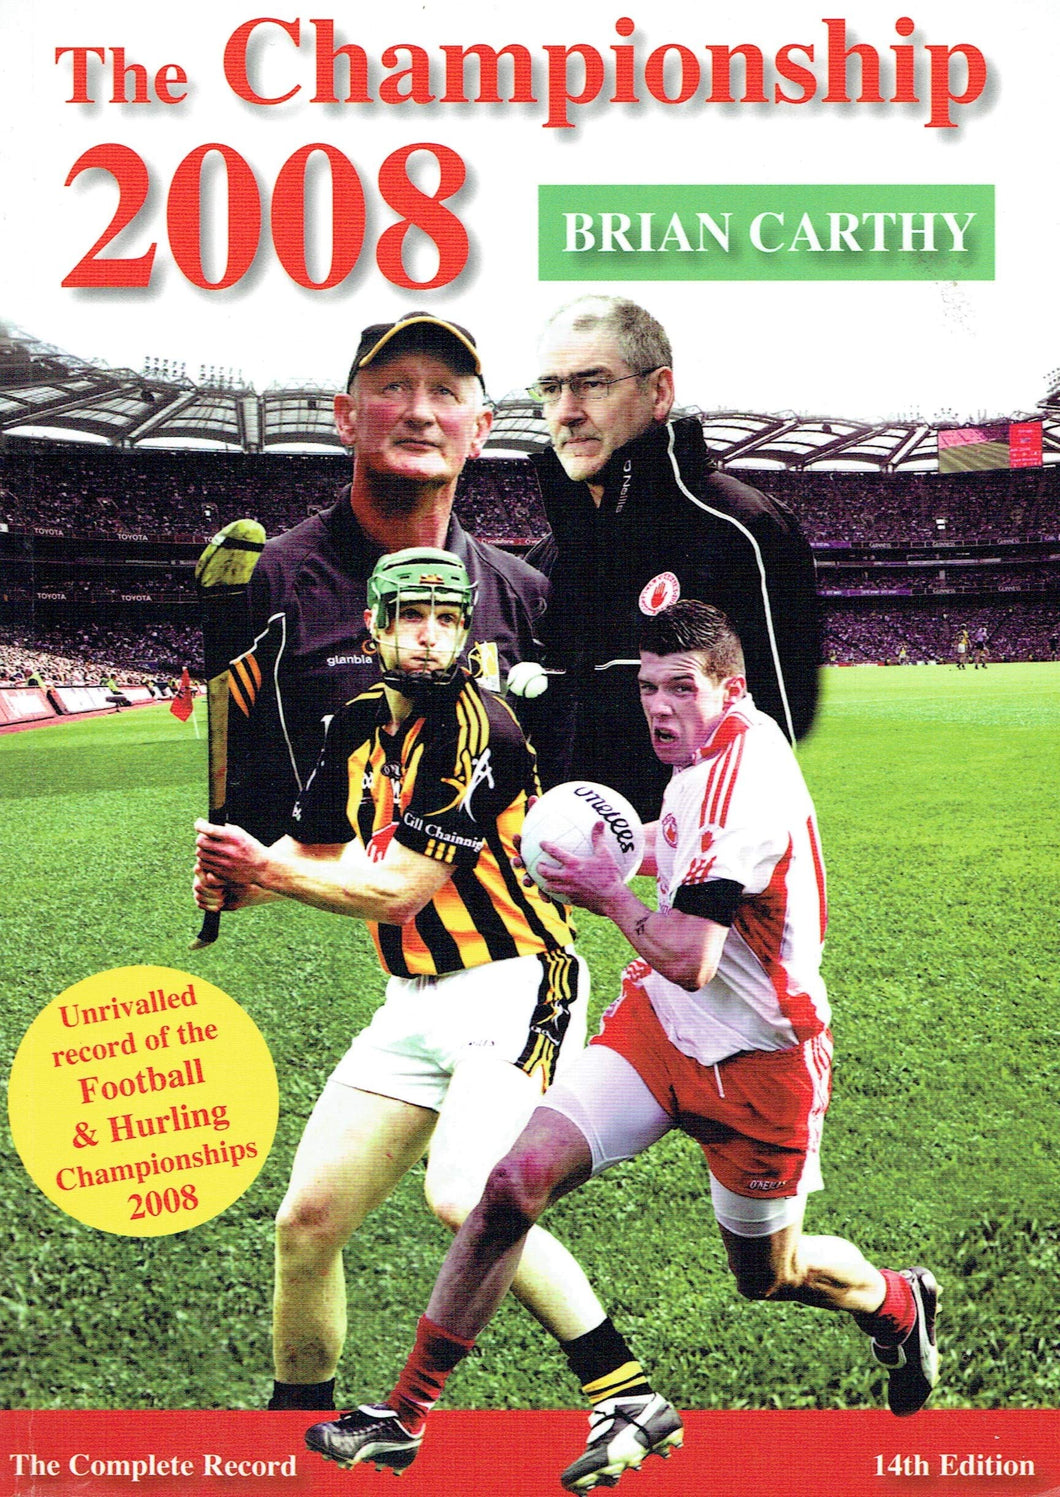 The Championship 2008 - The Complete Record, 14th Edition: Unrivalled Record of the Football and Hurling Championships 2008